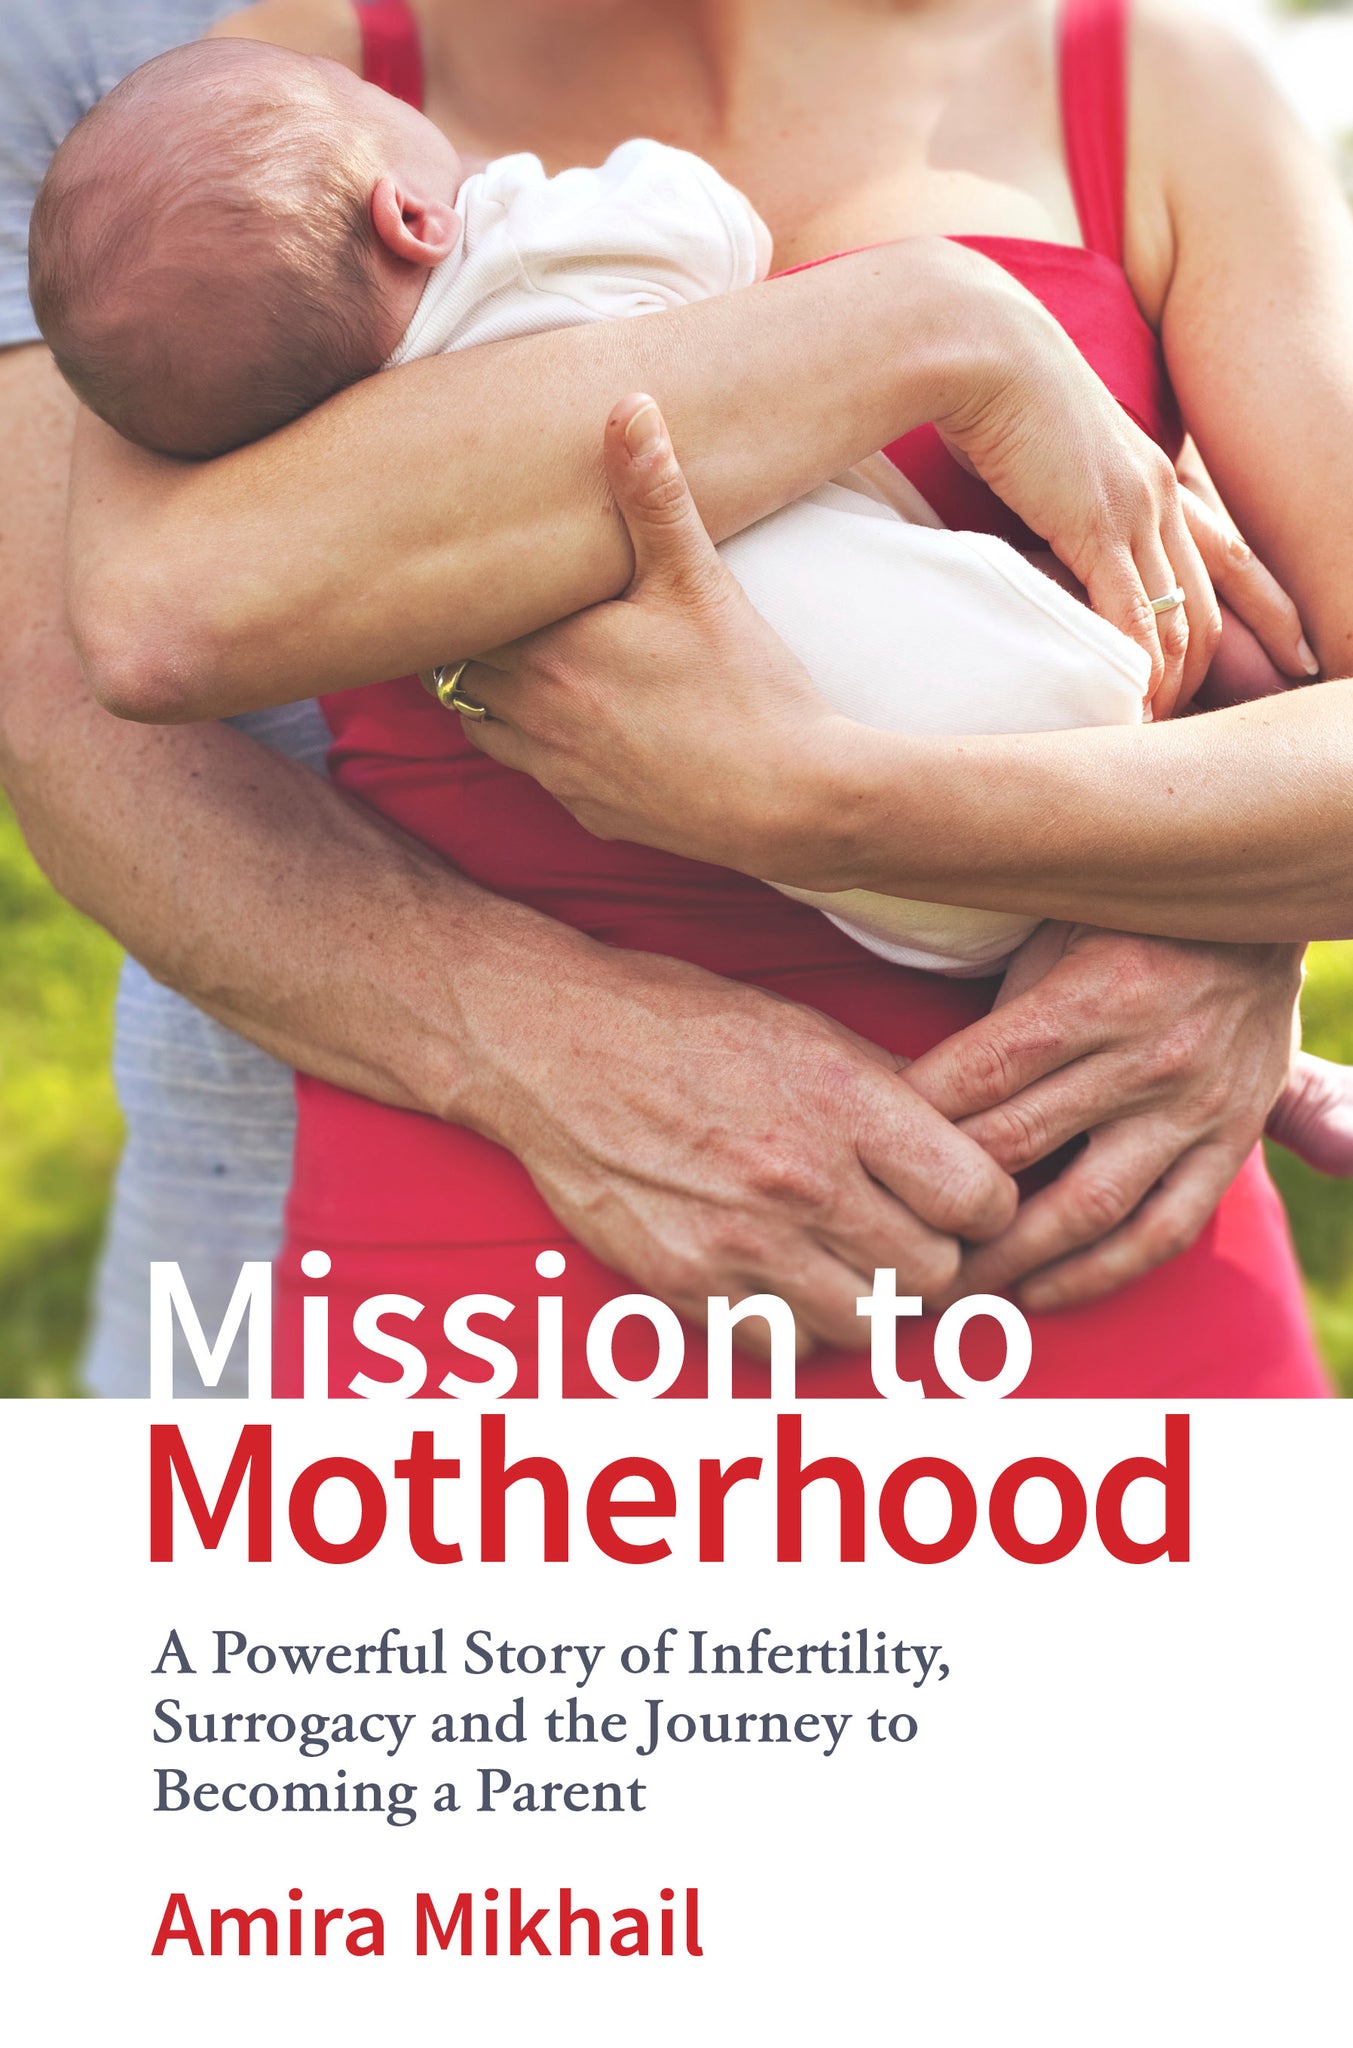 Mission to Motherhood: A Powerful Story of Infertility, Surrogacy and the Journey to Becoming a Parent